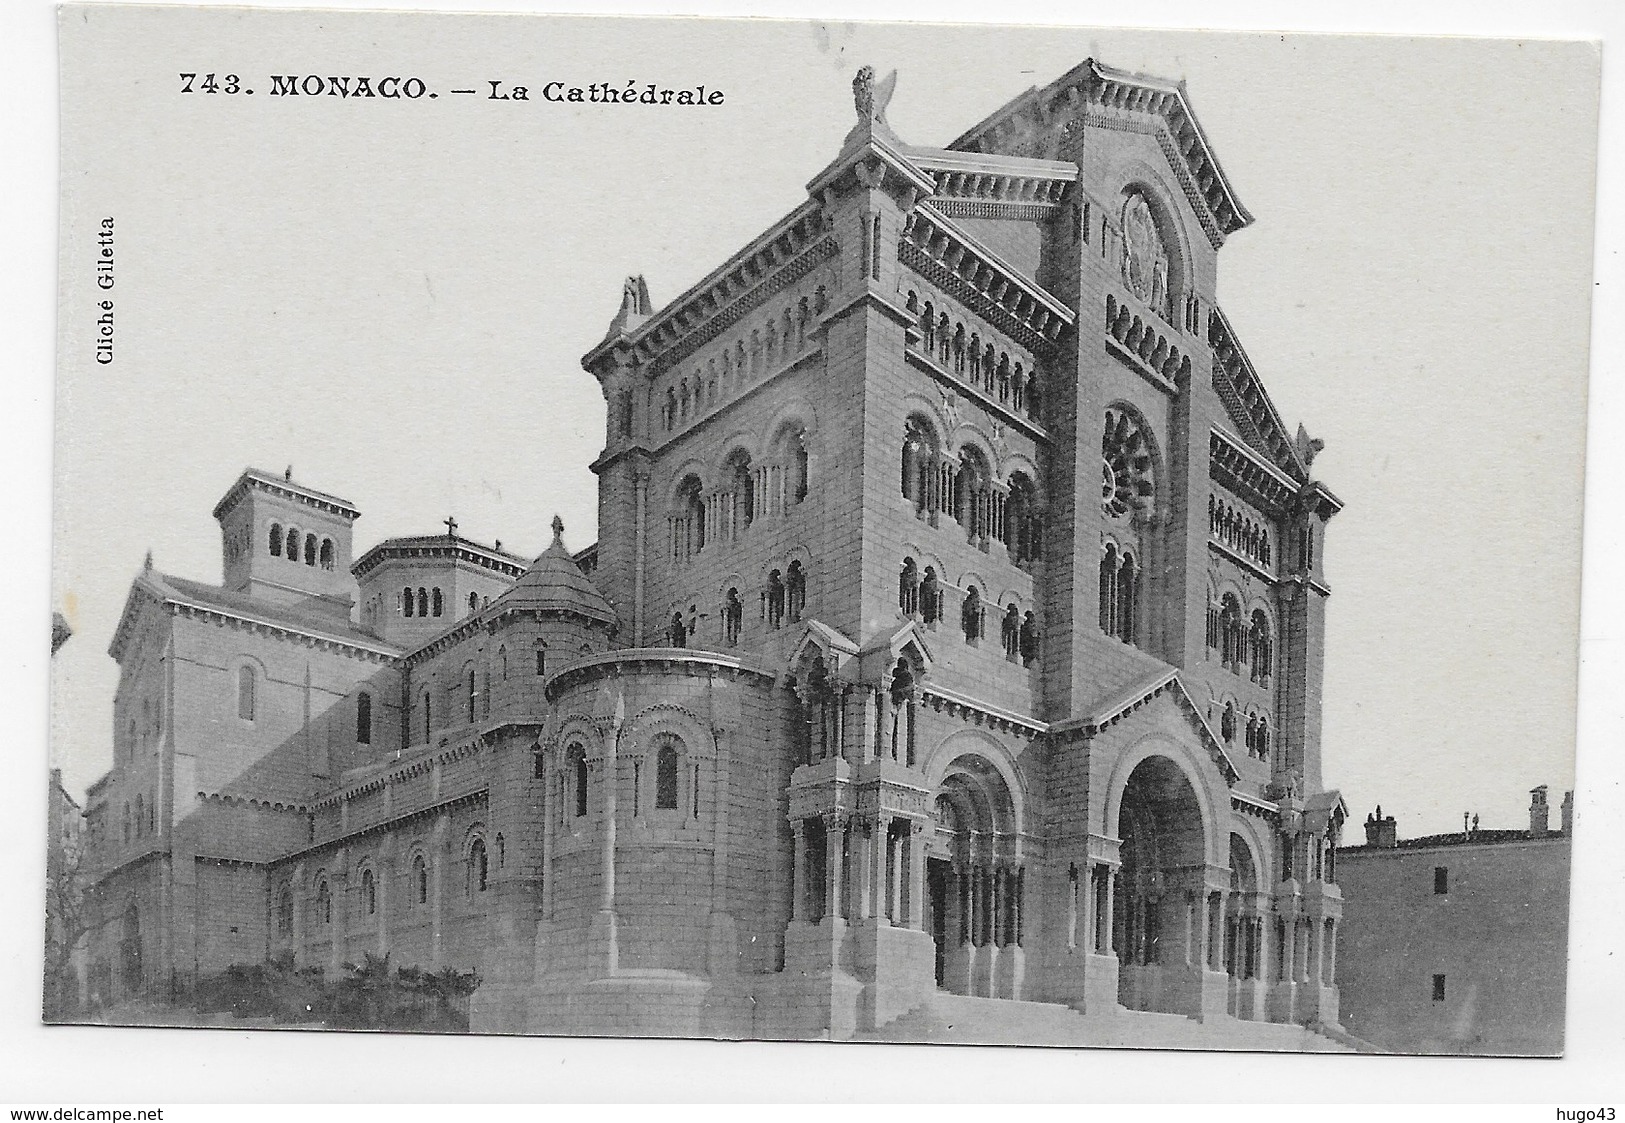 MONACO - N° 743 - LA CATHEDRALE - CPA NON VOYAGEE - Kathedrale Notre-Dame-Immaculée